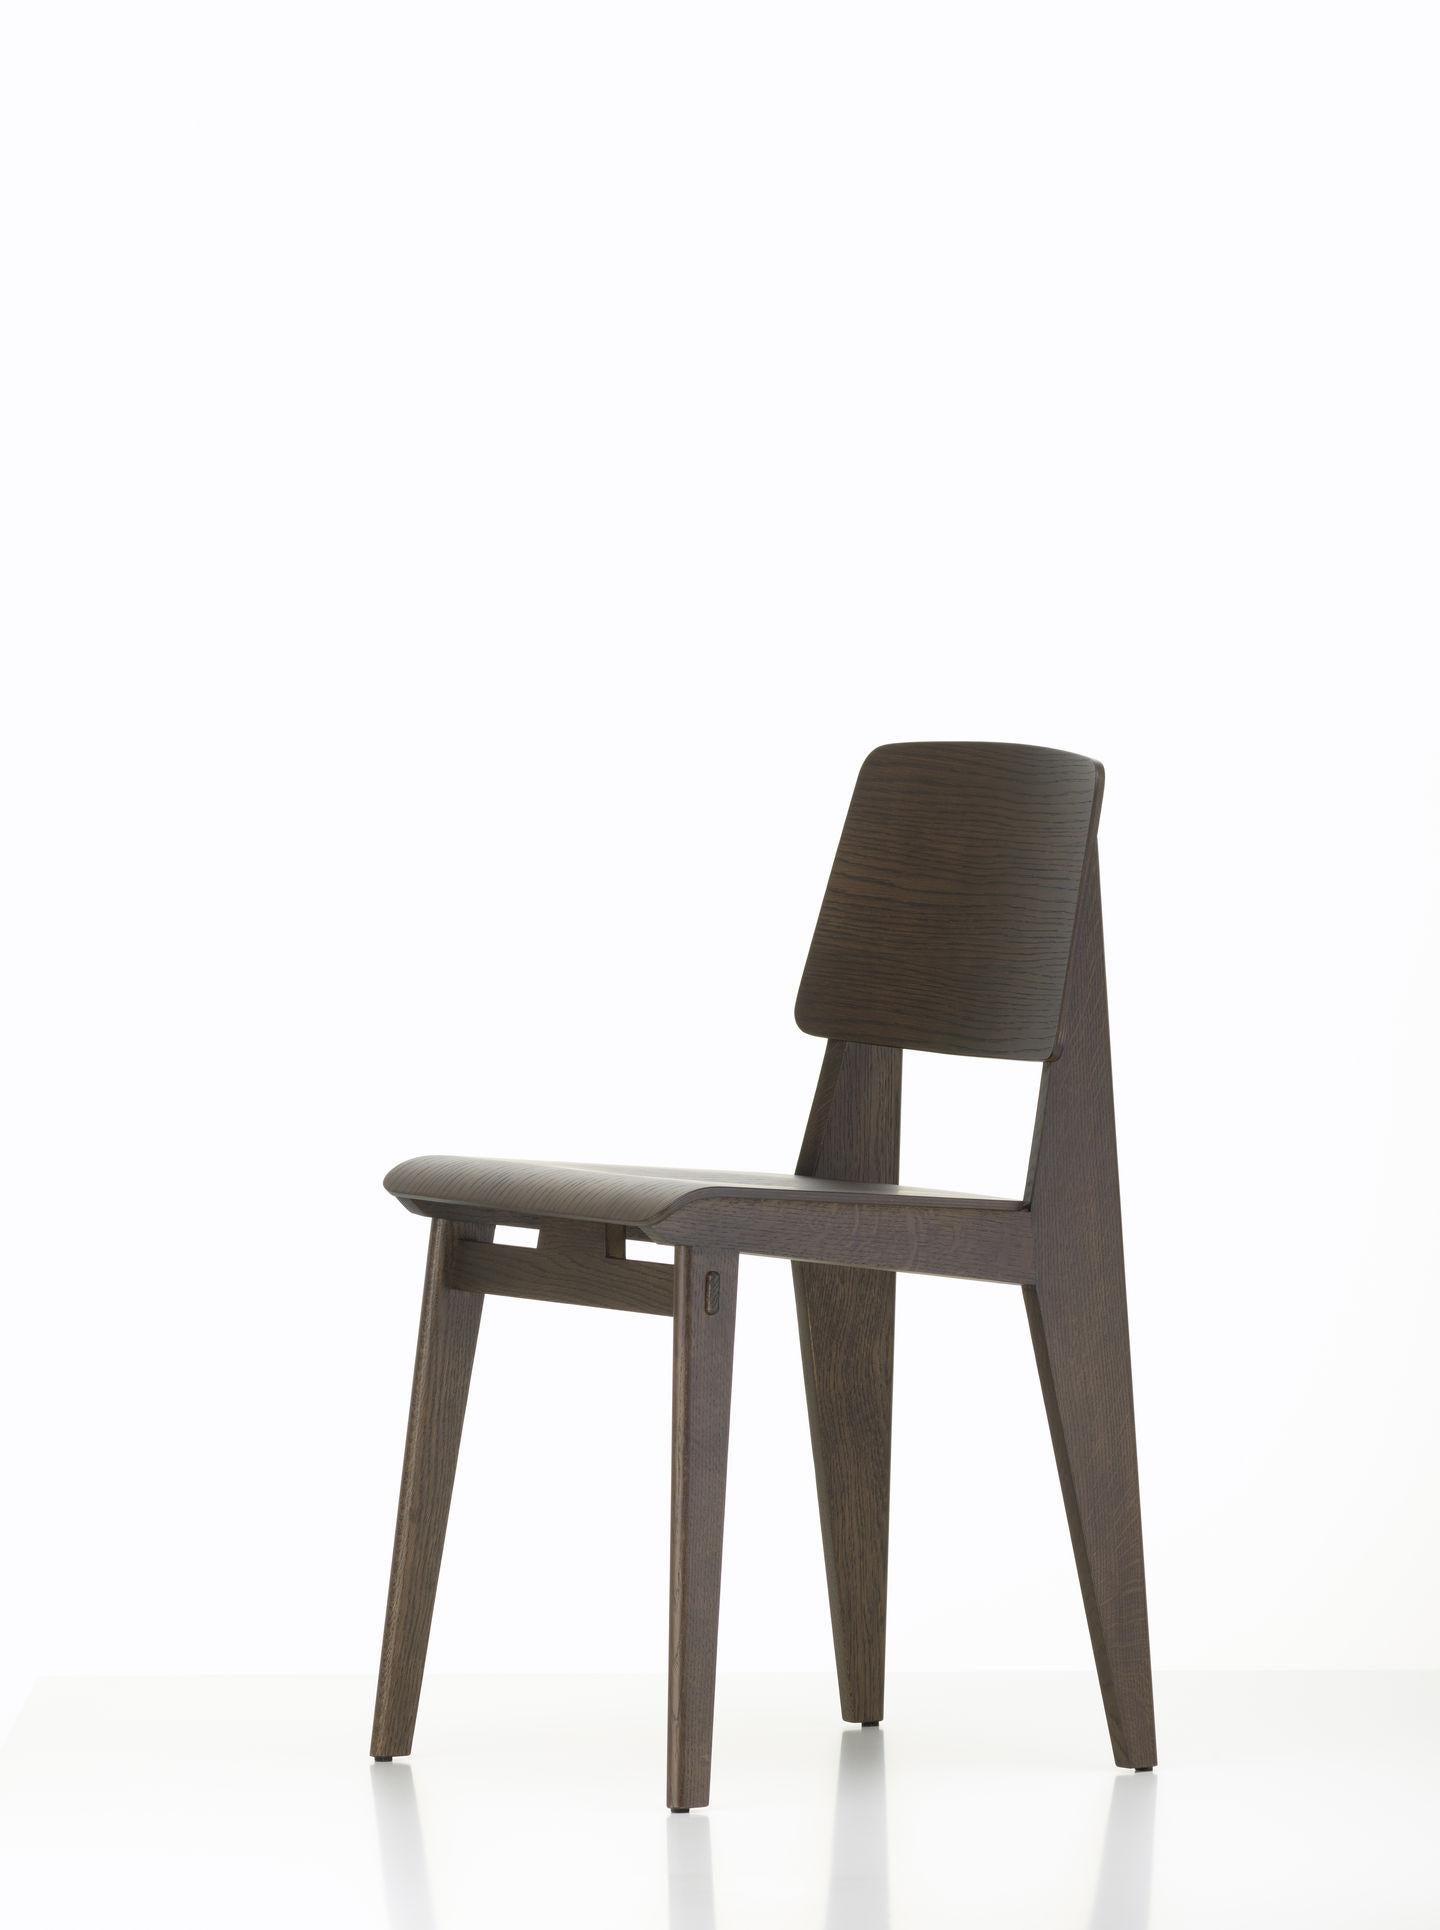 Jean Prouvé Dark-Stained Oak Chaise Tout Bois Chair by Vitra 5